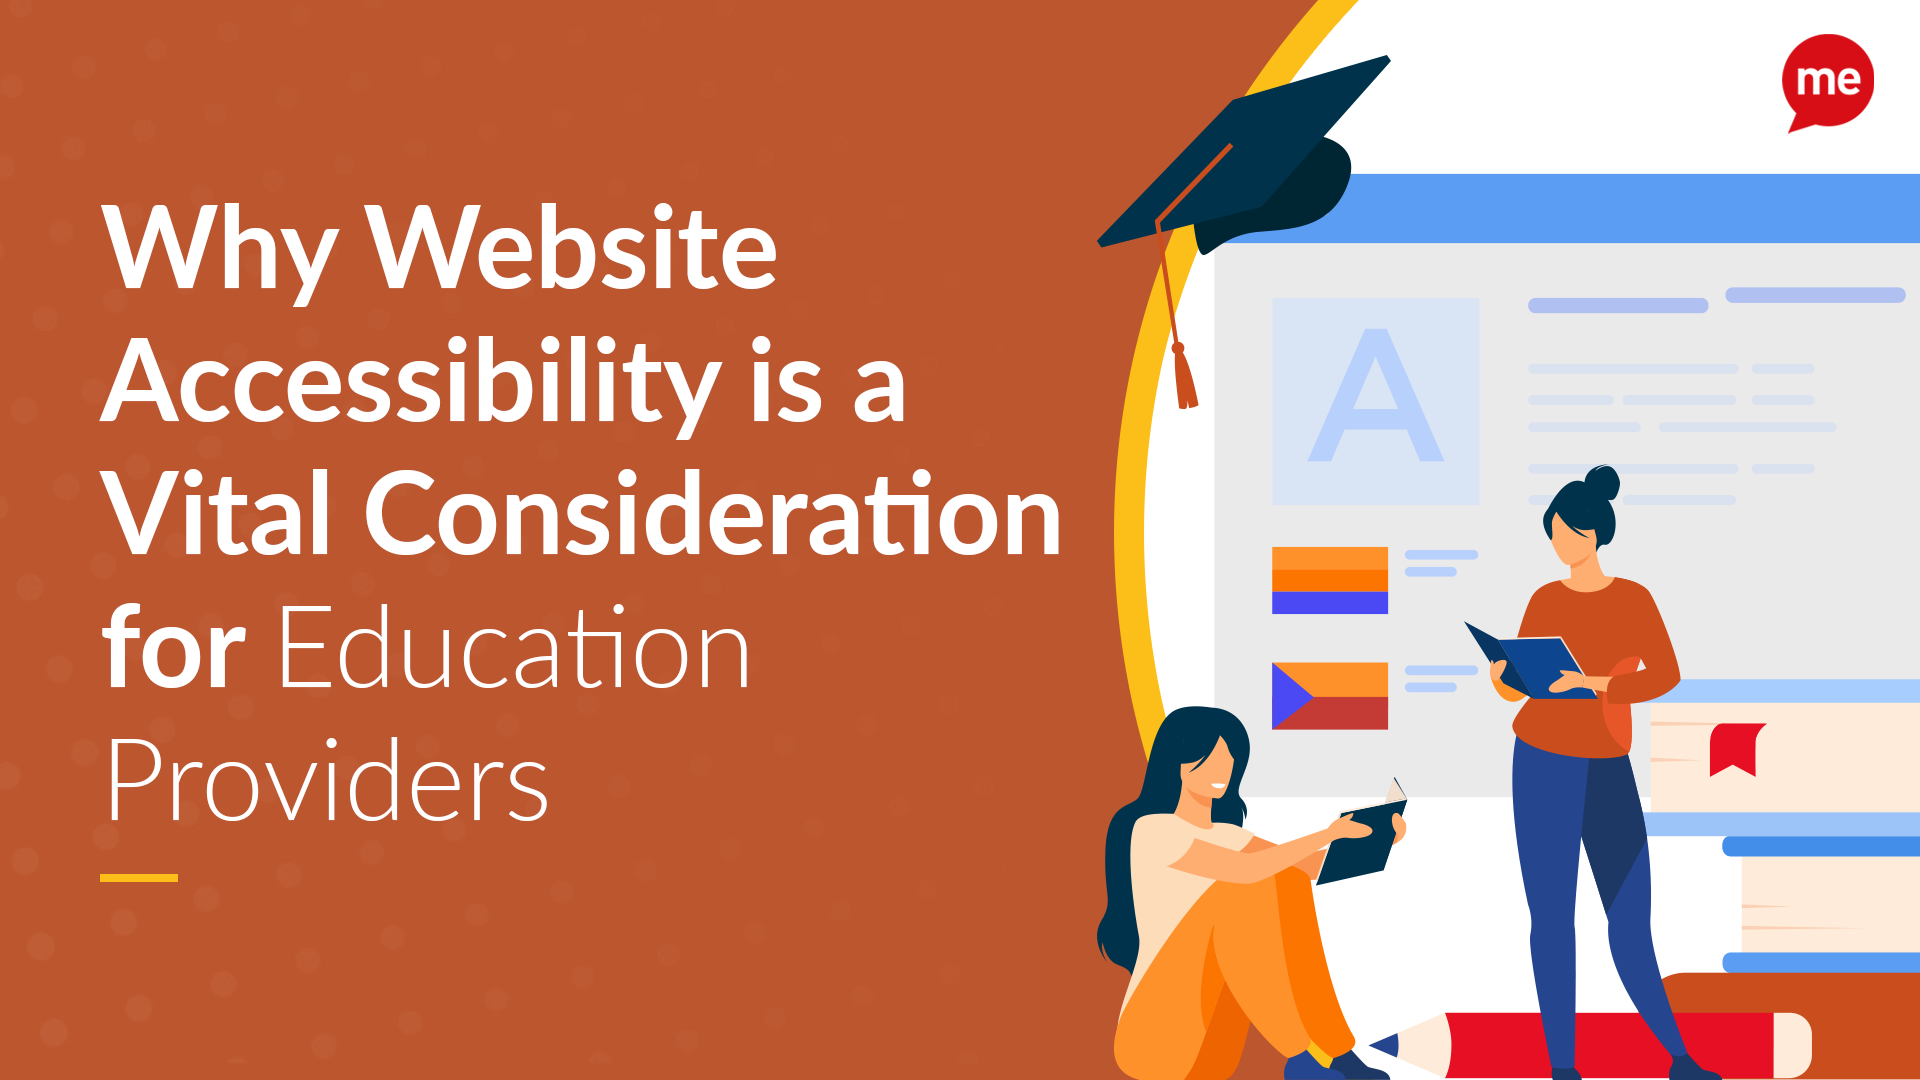 Why website accessibility is a vital consideration for education providers